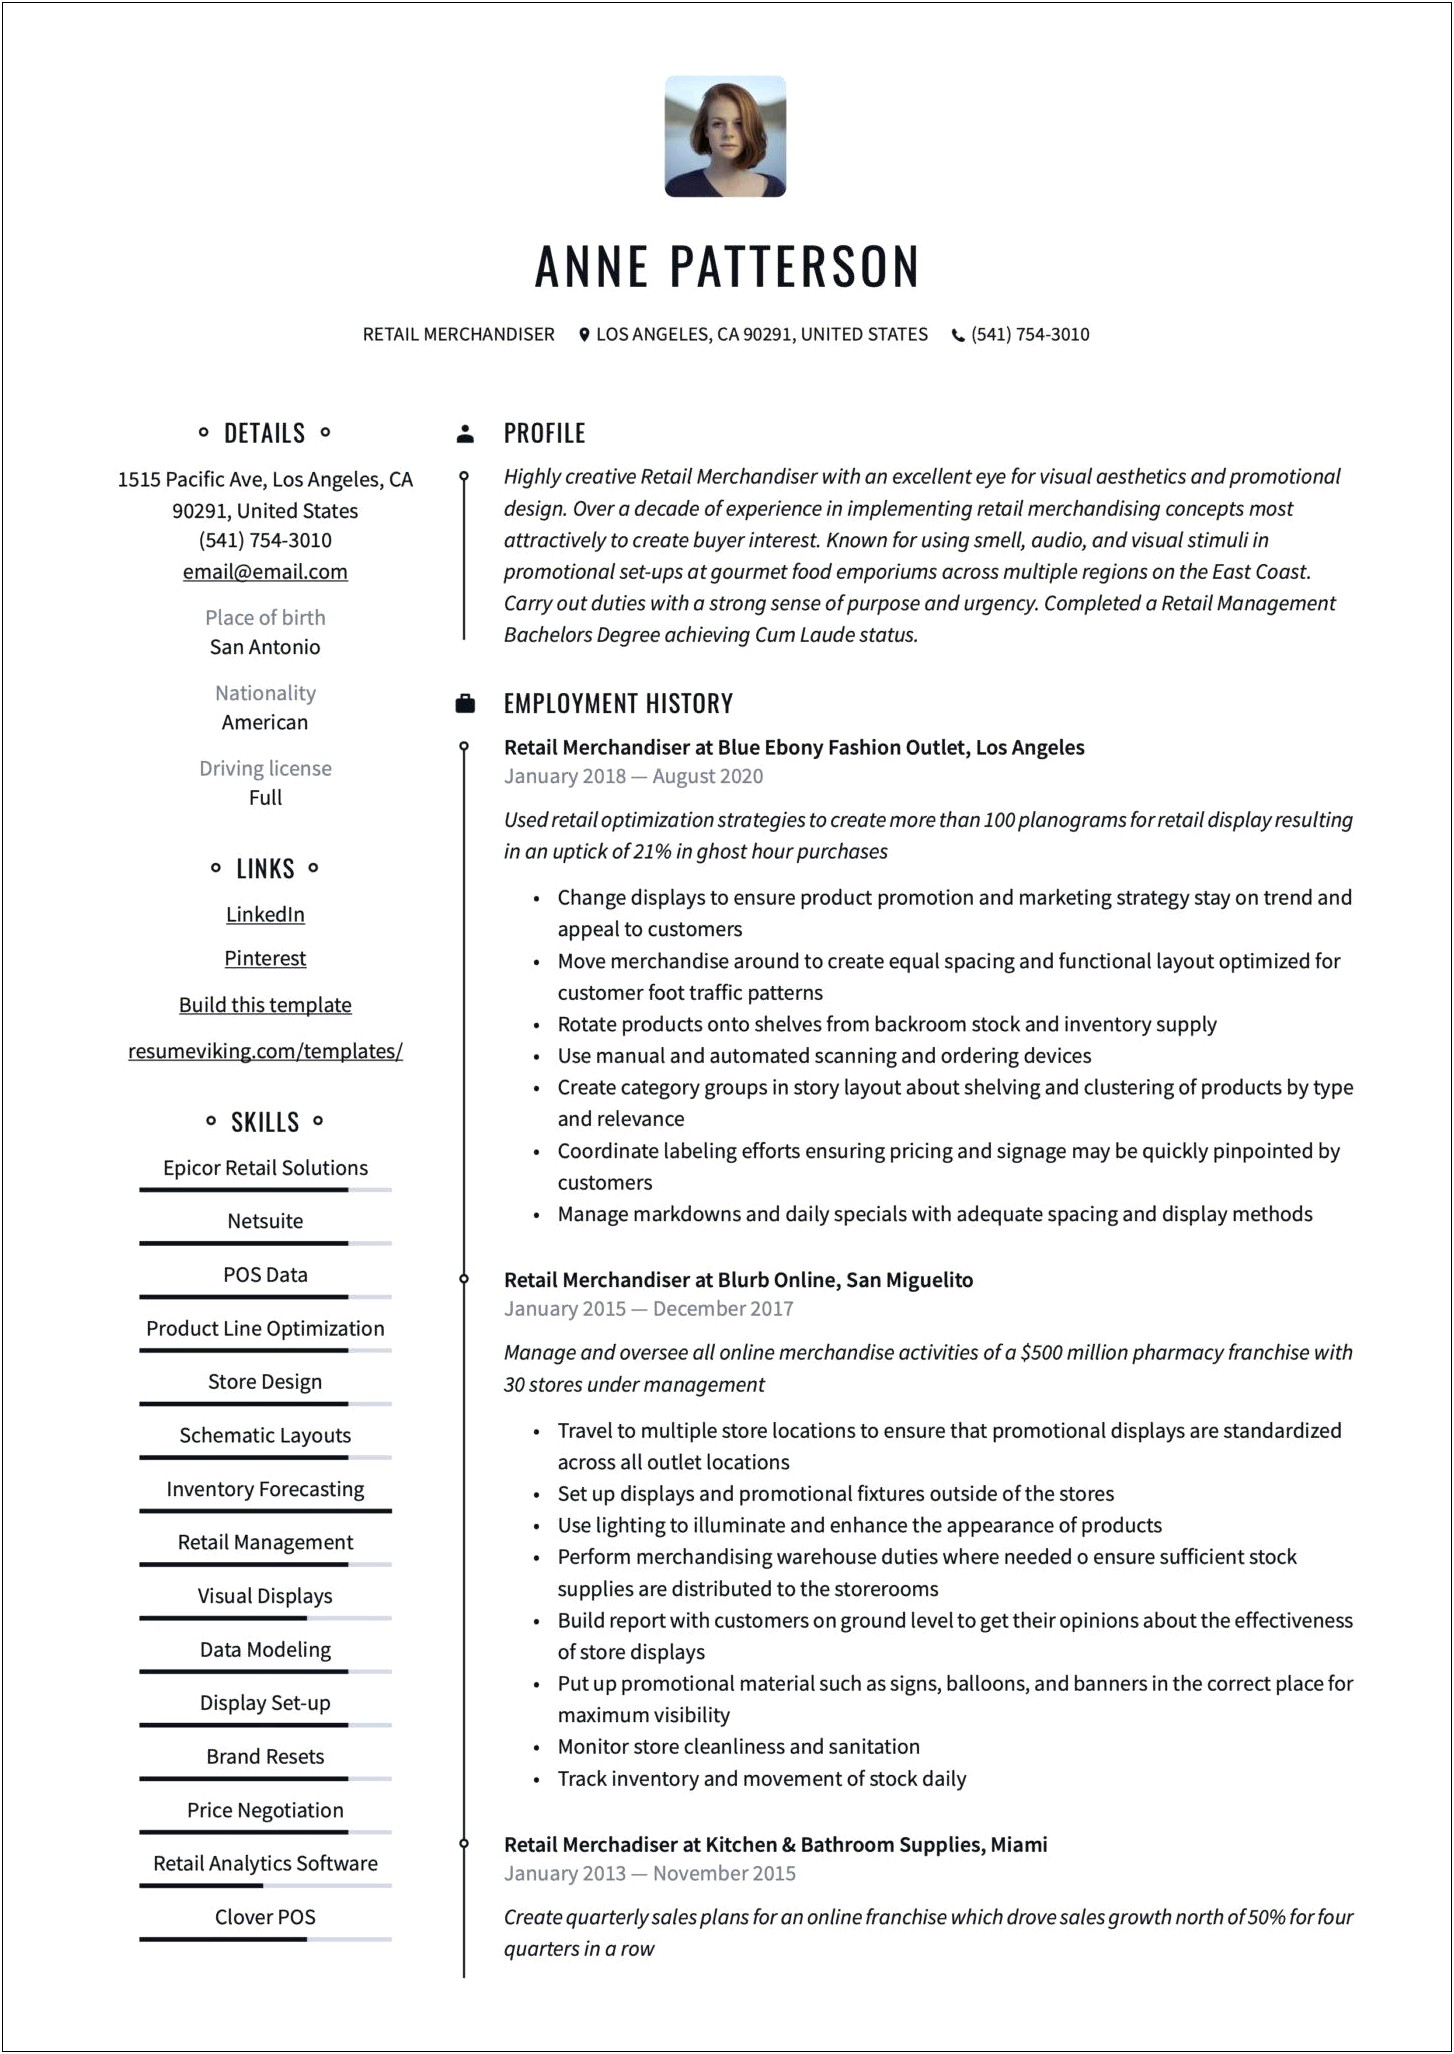 Resume Wording For A Merchandising Specialist